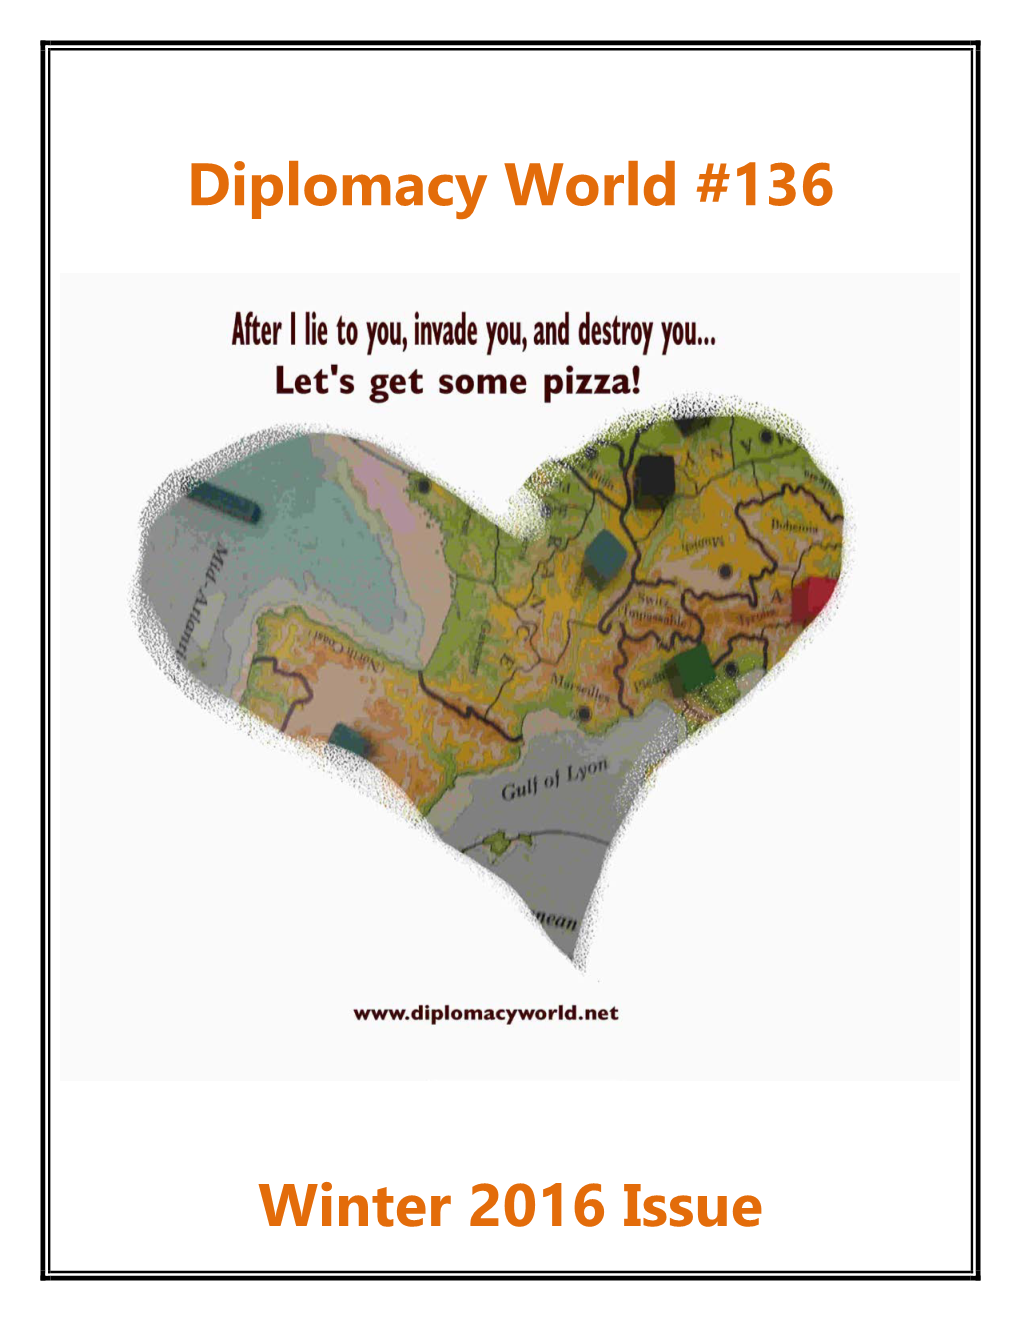 Diplomacy World #136, Winter 2016 Issue